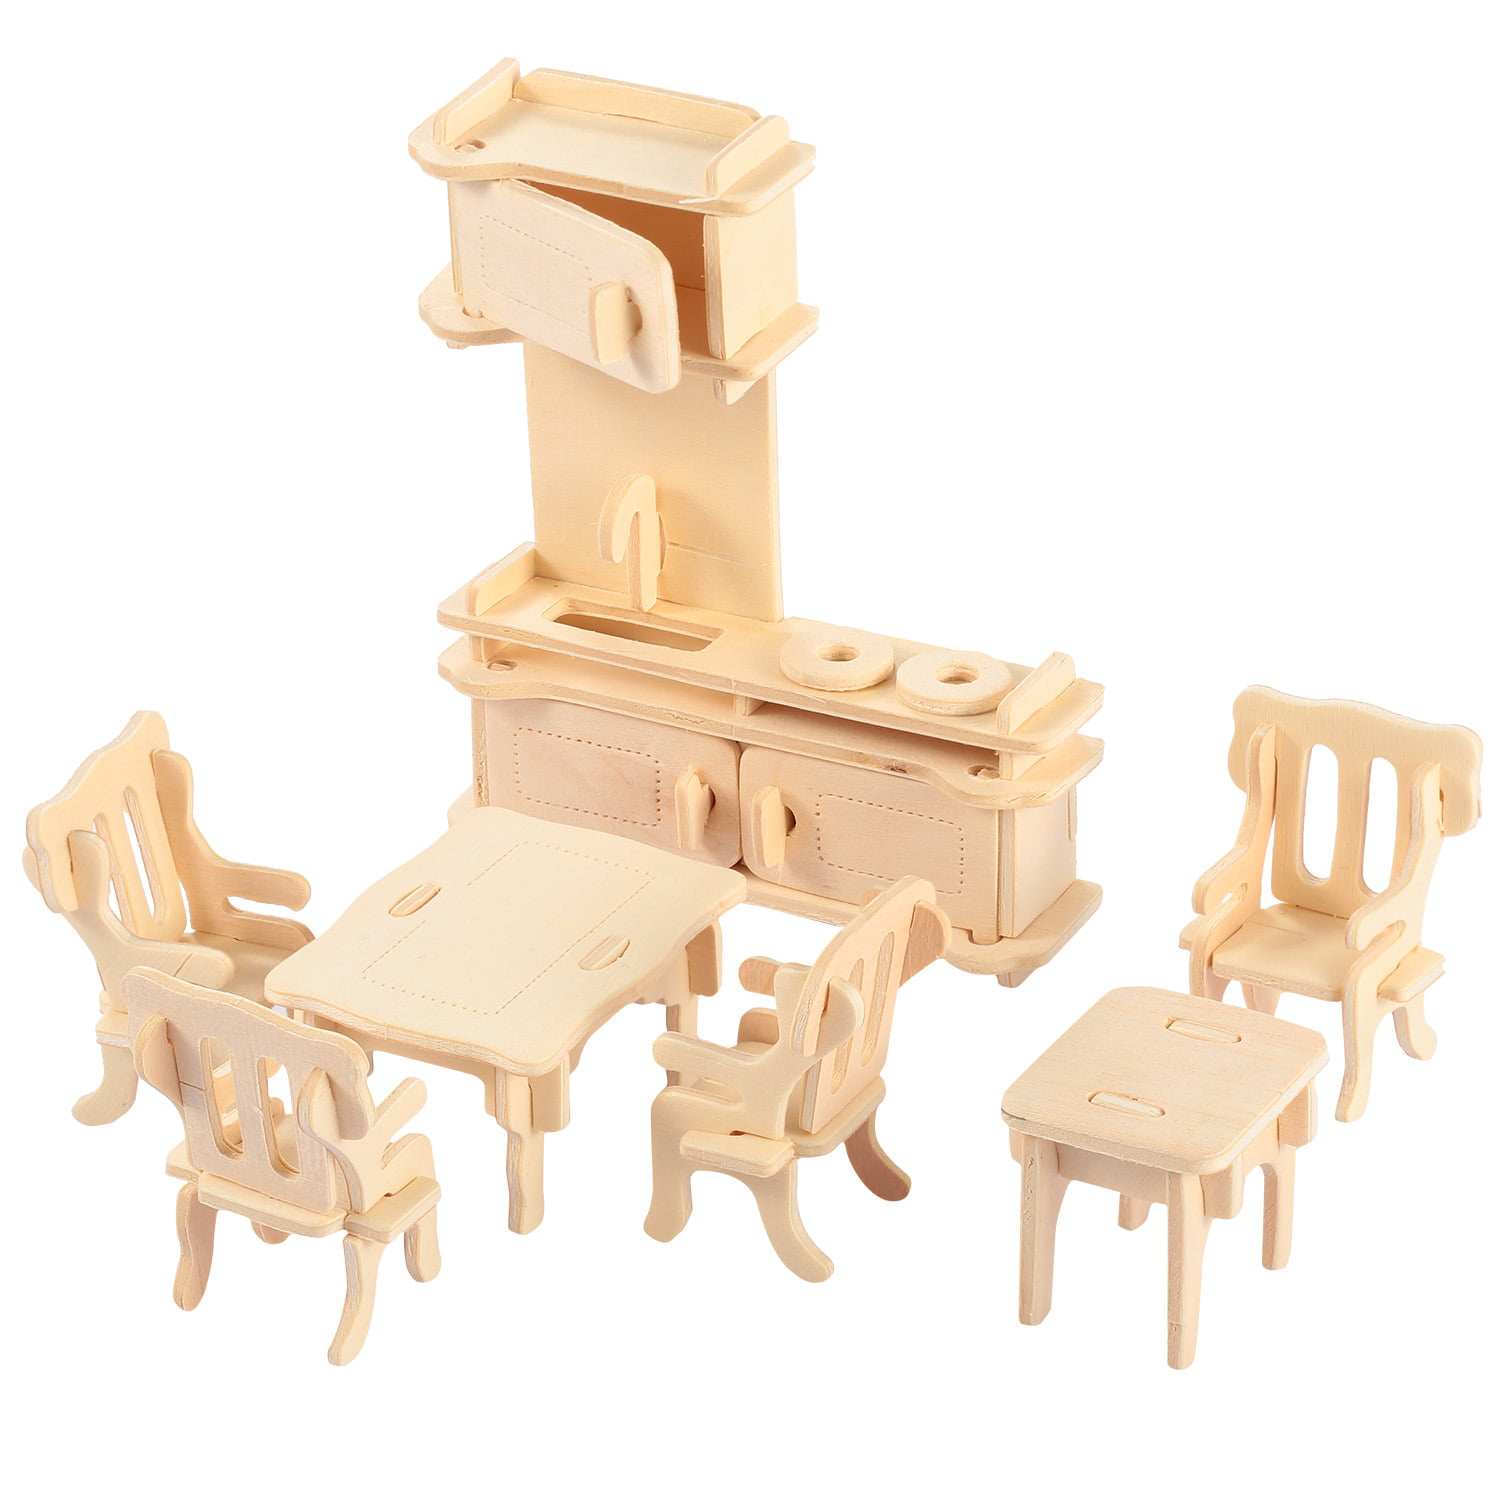 where can i buy dollhouse furniture